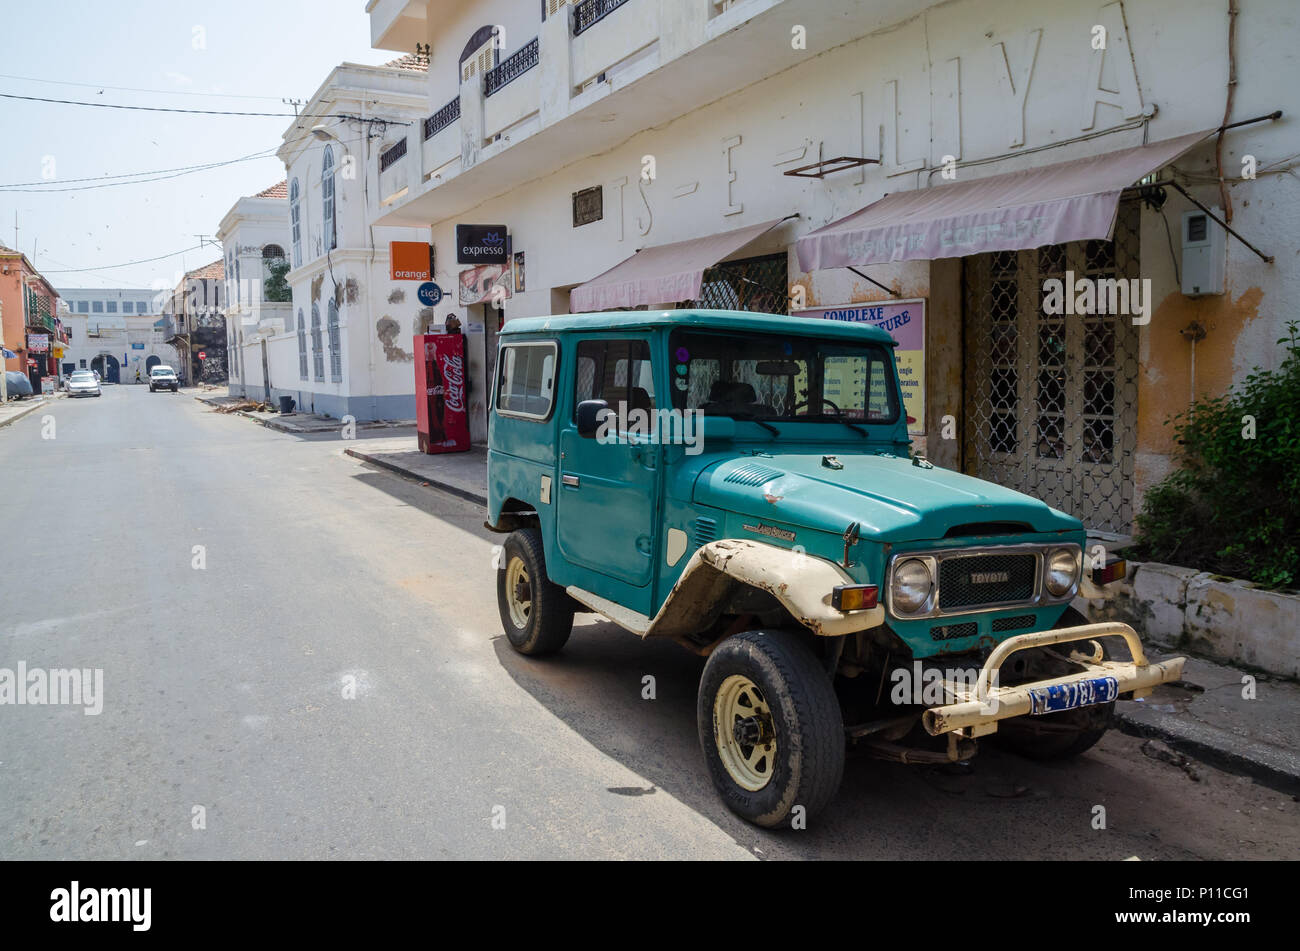 Classic Toyota Land Cruiser 40 series offroad vehicle in street of Saint-Louis Stock Photo